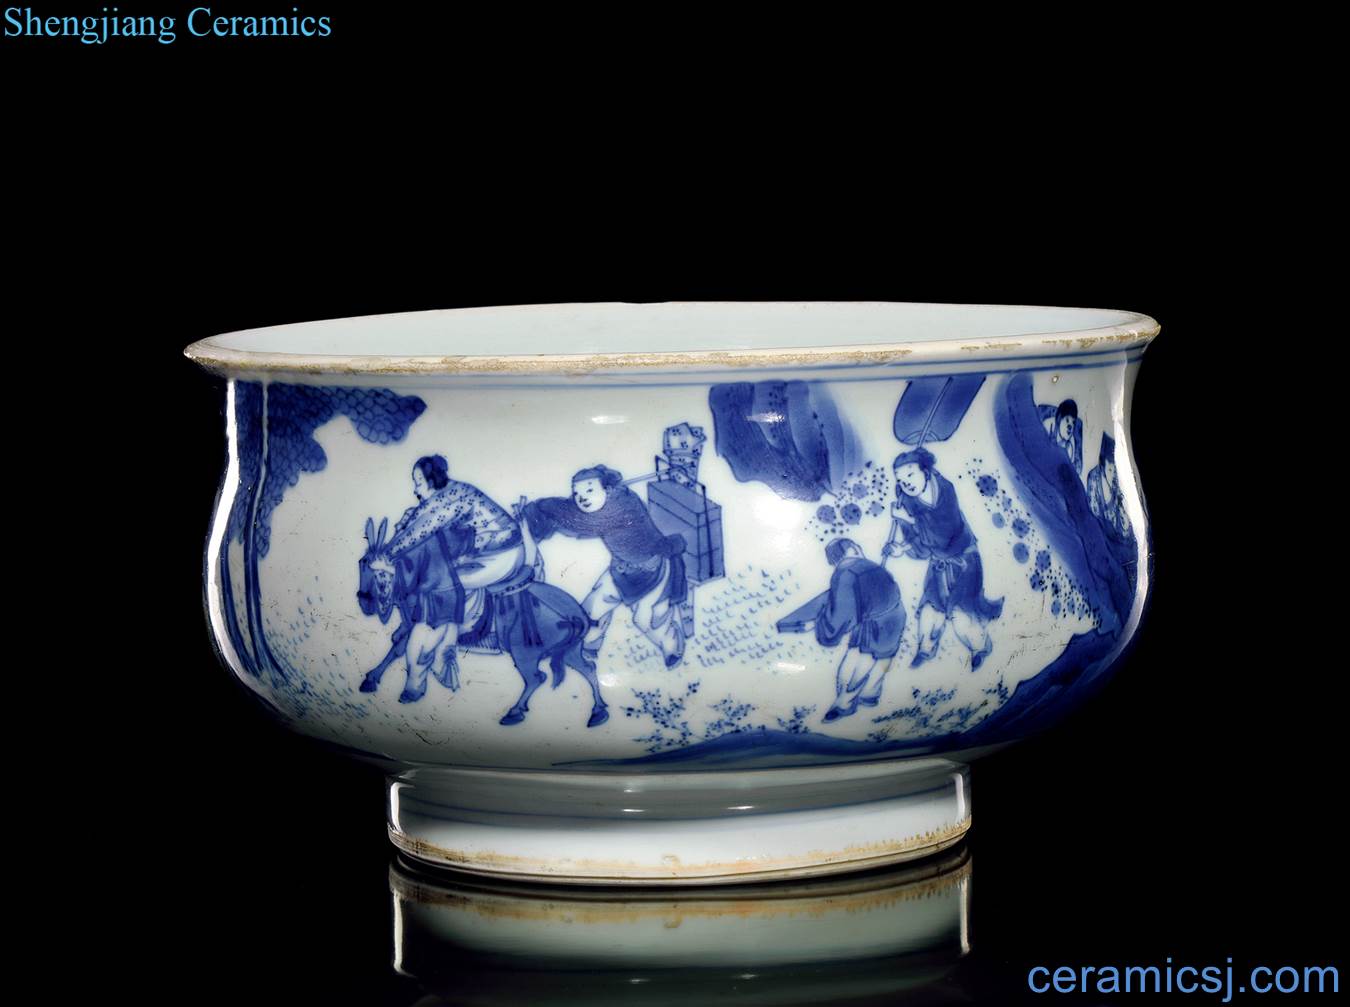 The late Ming dynasty Blue and white WenXiangLu characters